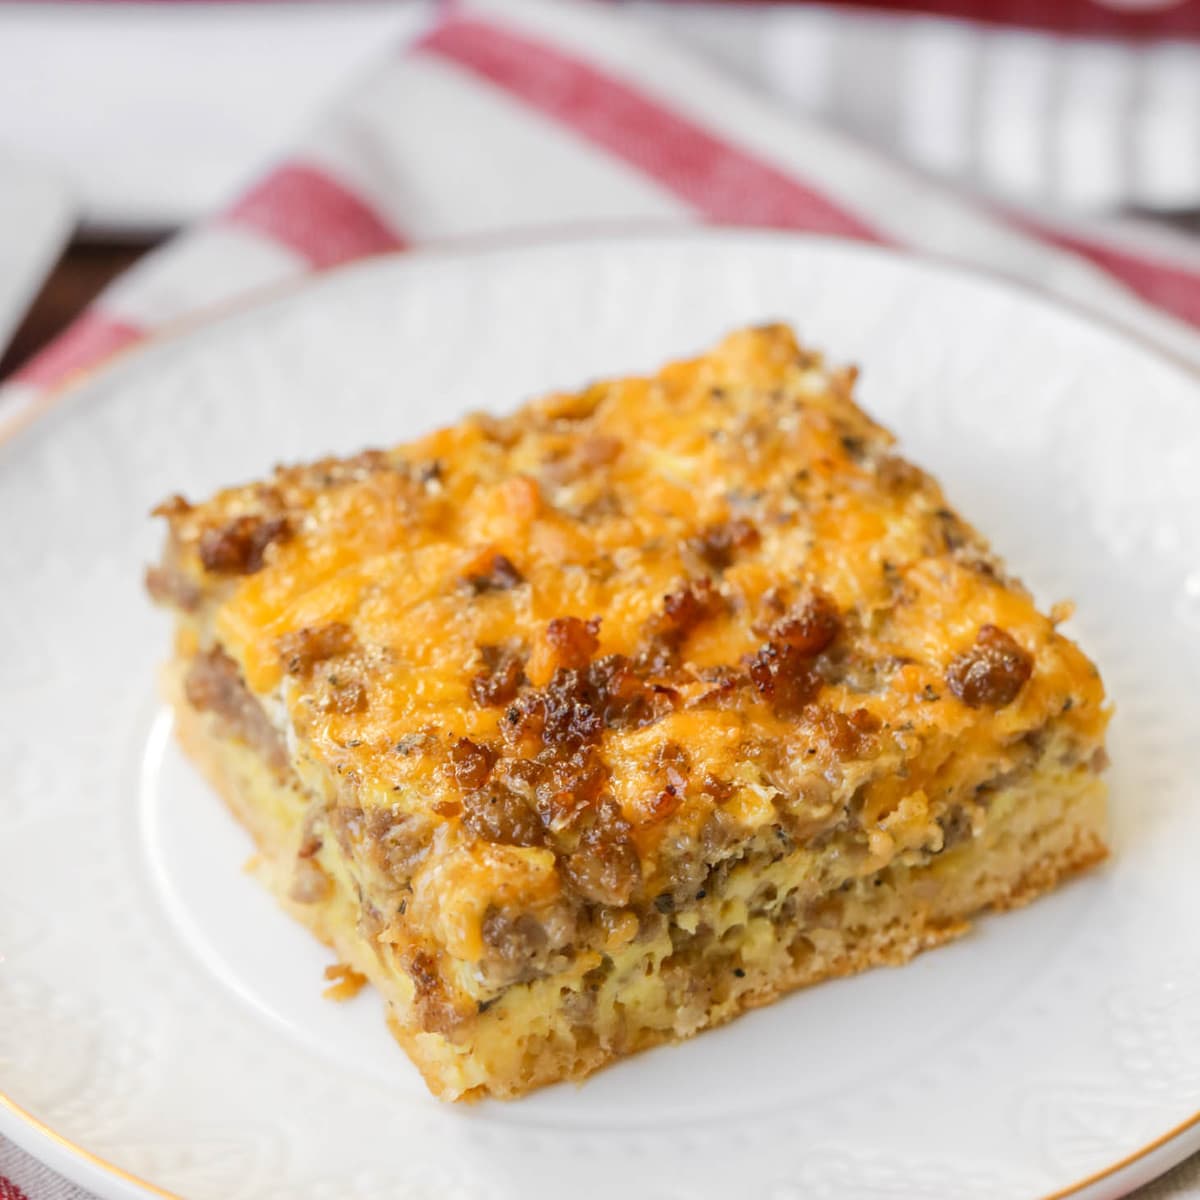 Thanksgiving breakfast ideas - a square slice of sausage breakfast casserole served on a white plate.